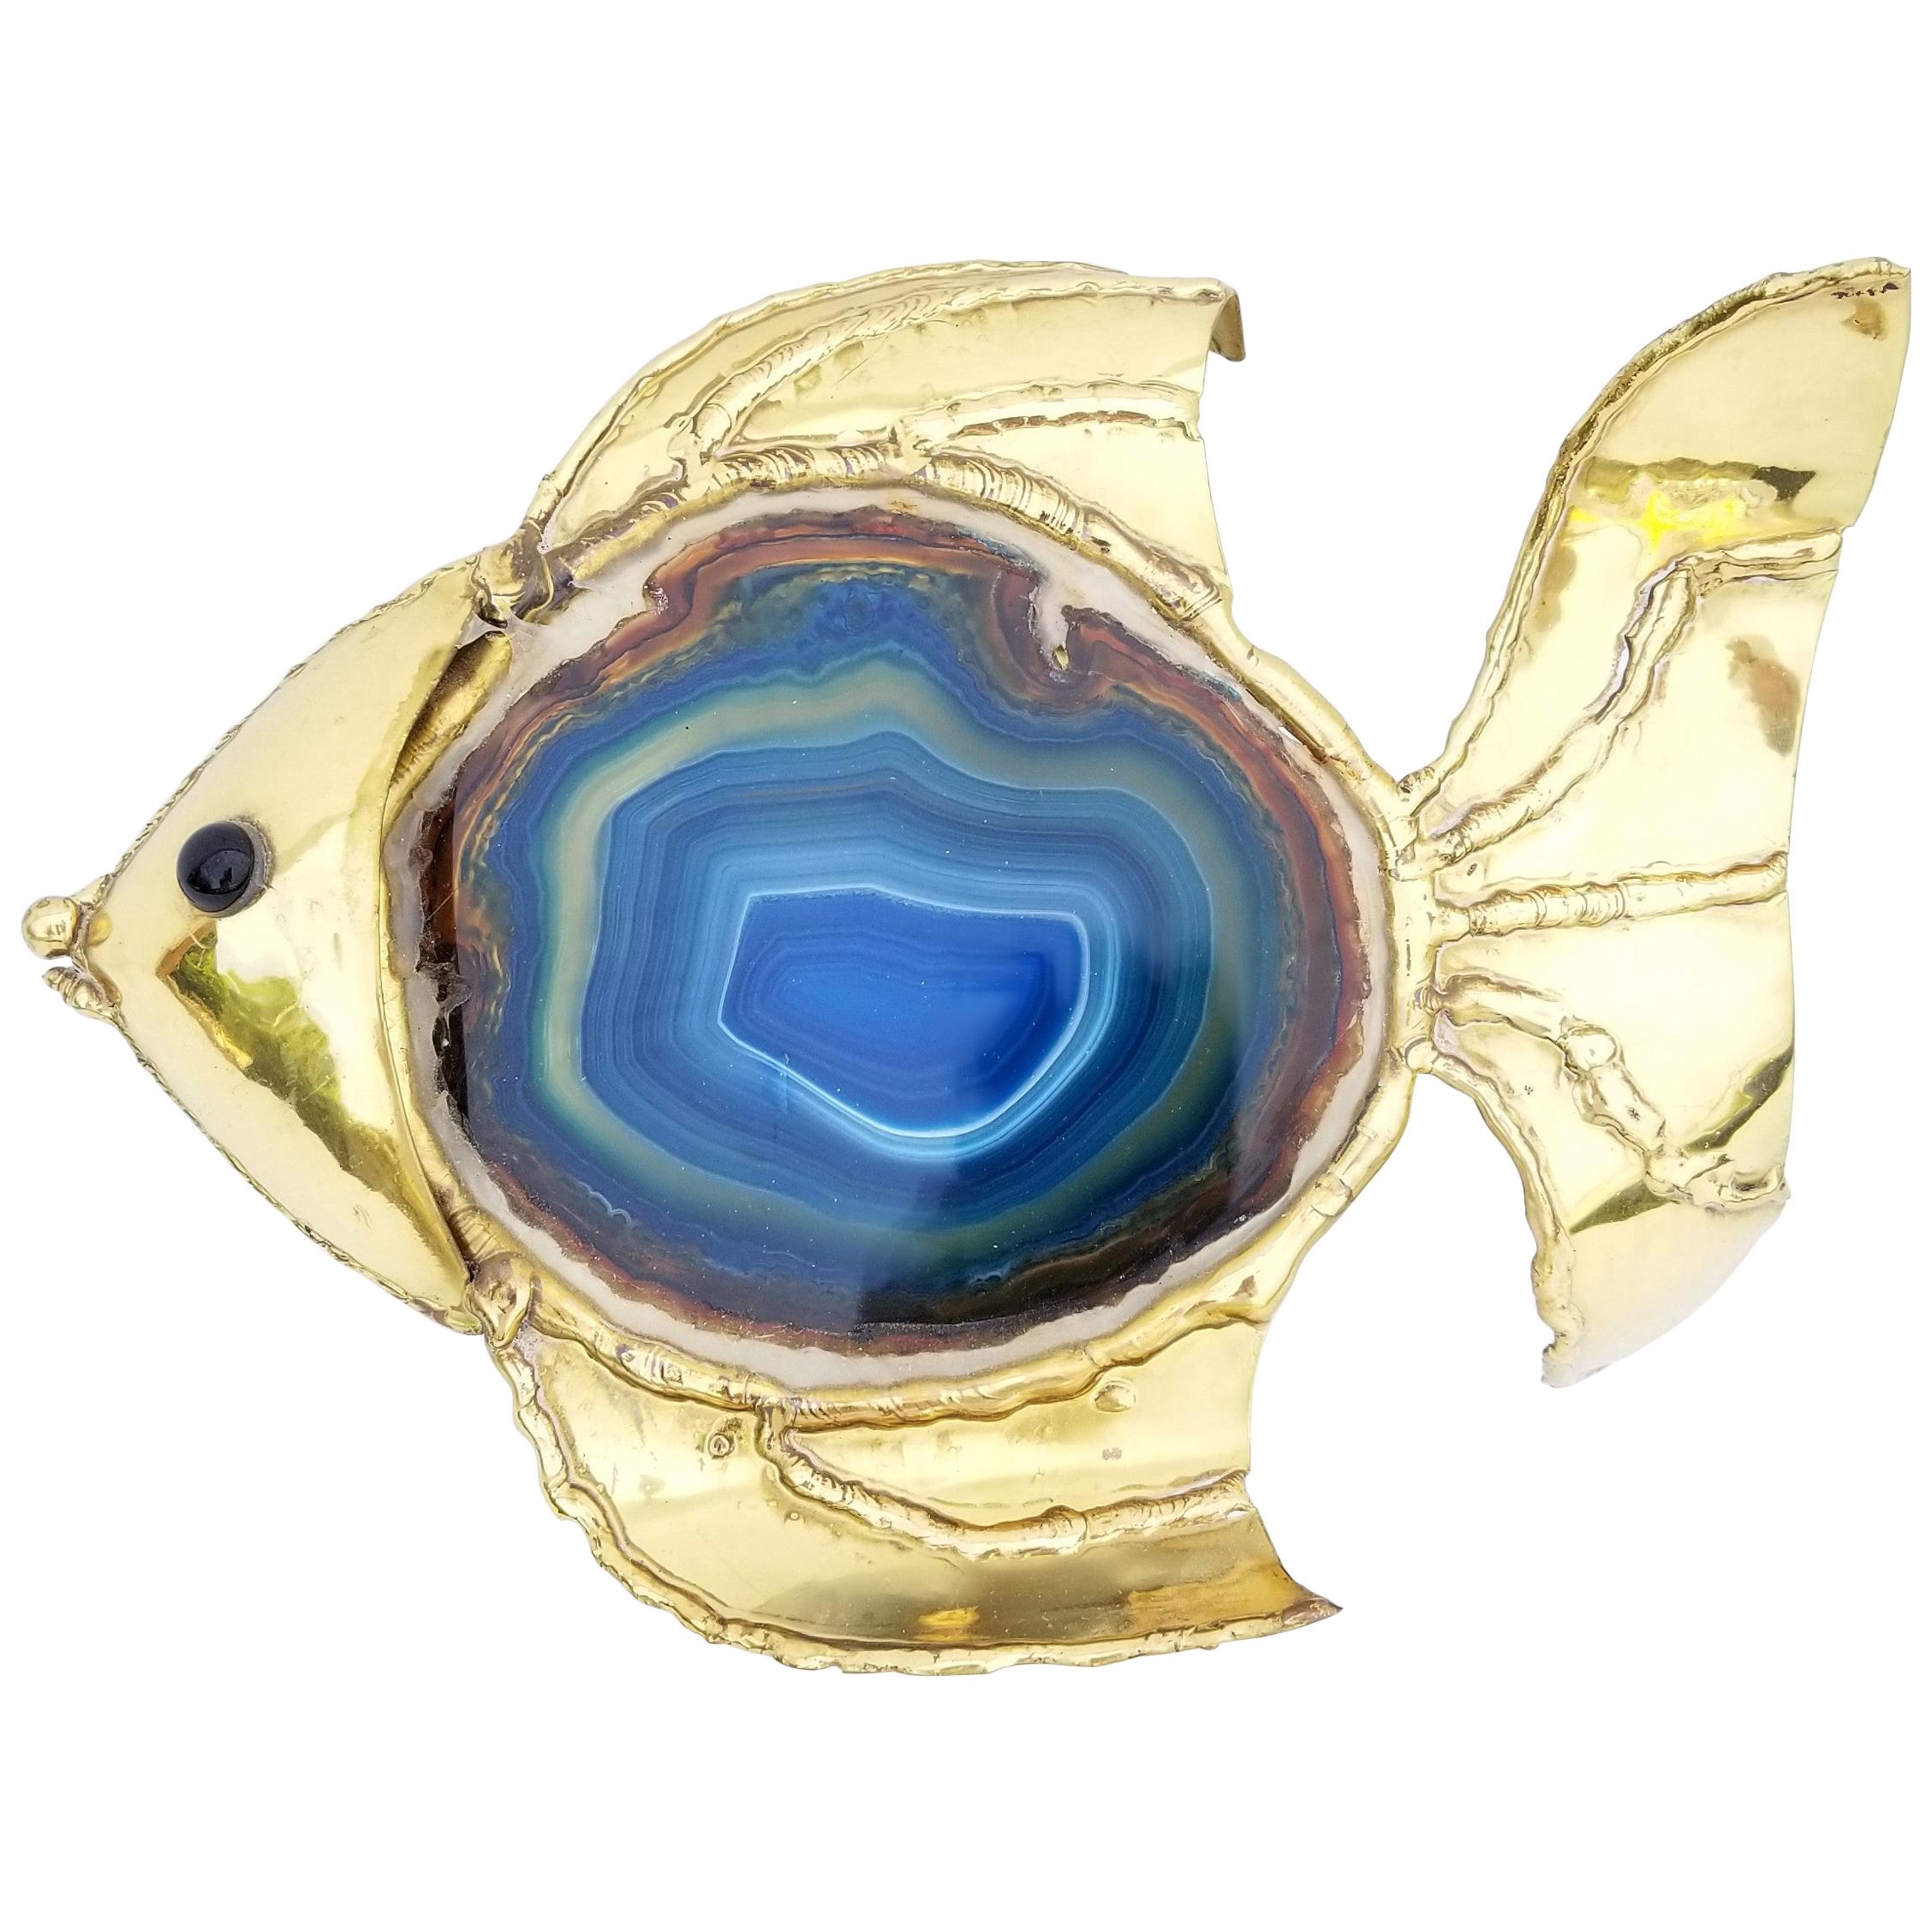 Isabelle & Robert Faure "Fish" Agate Lamp For Sale